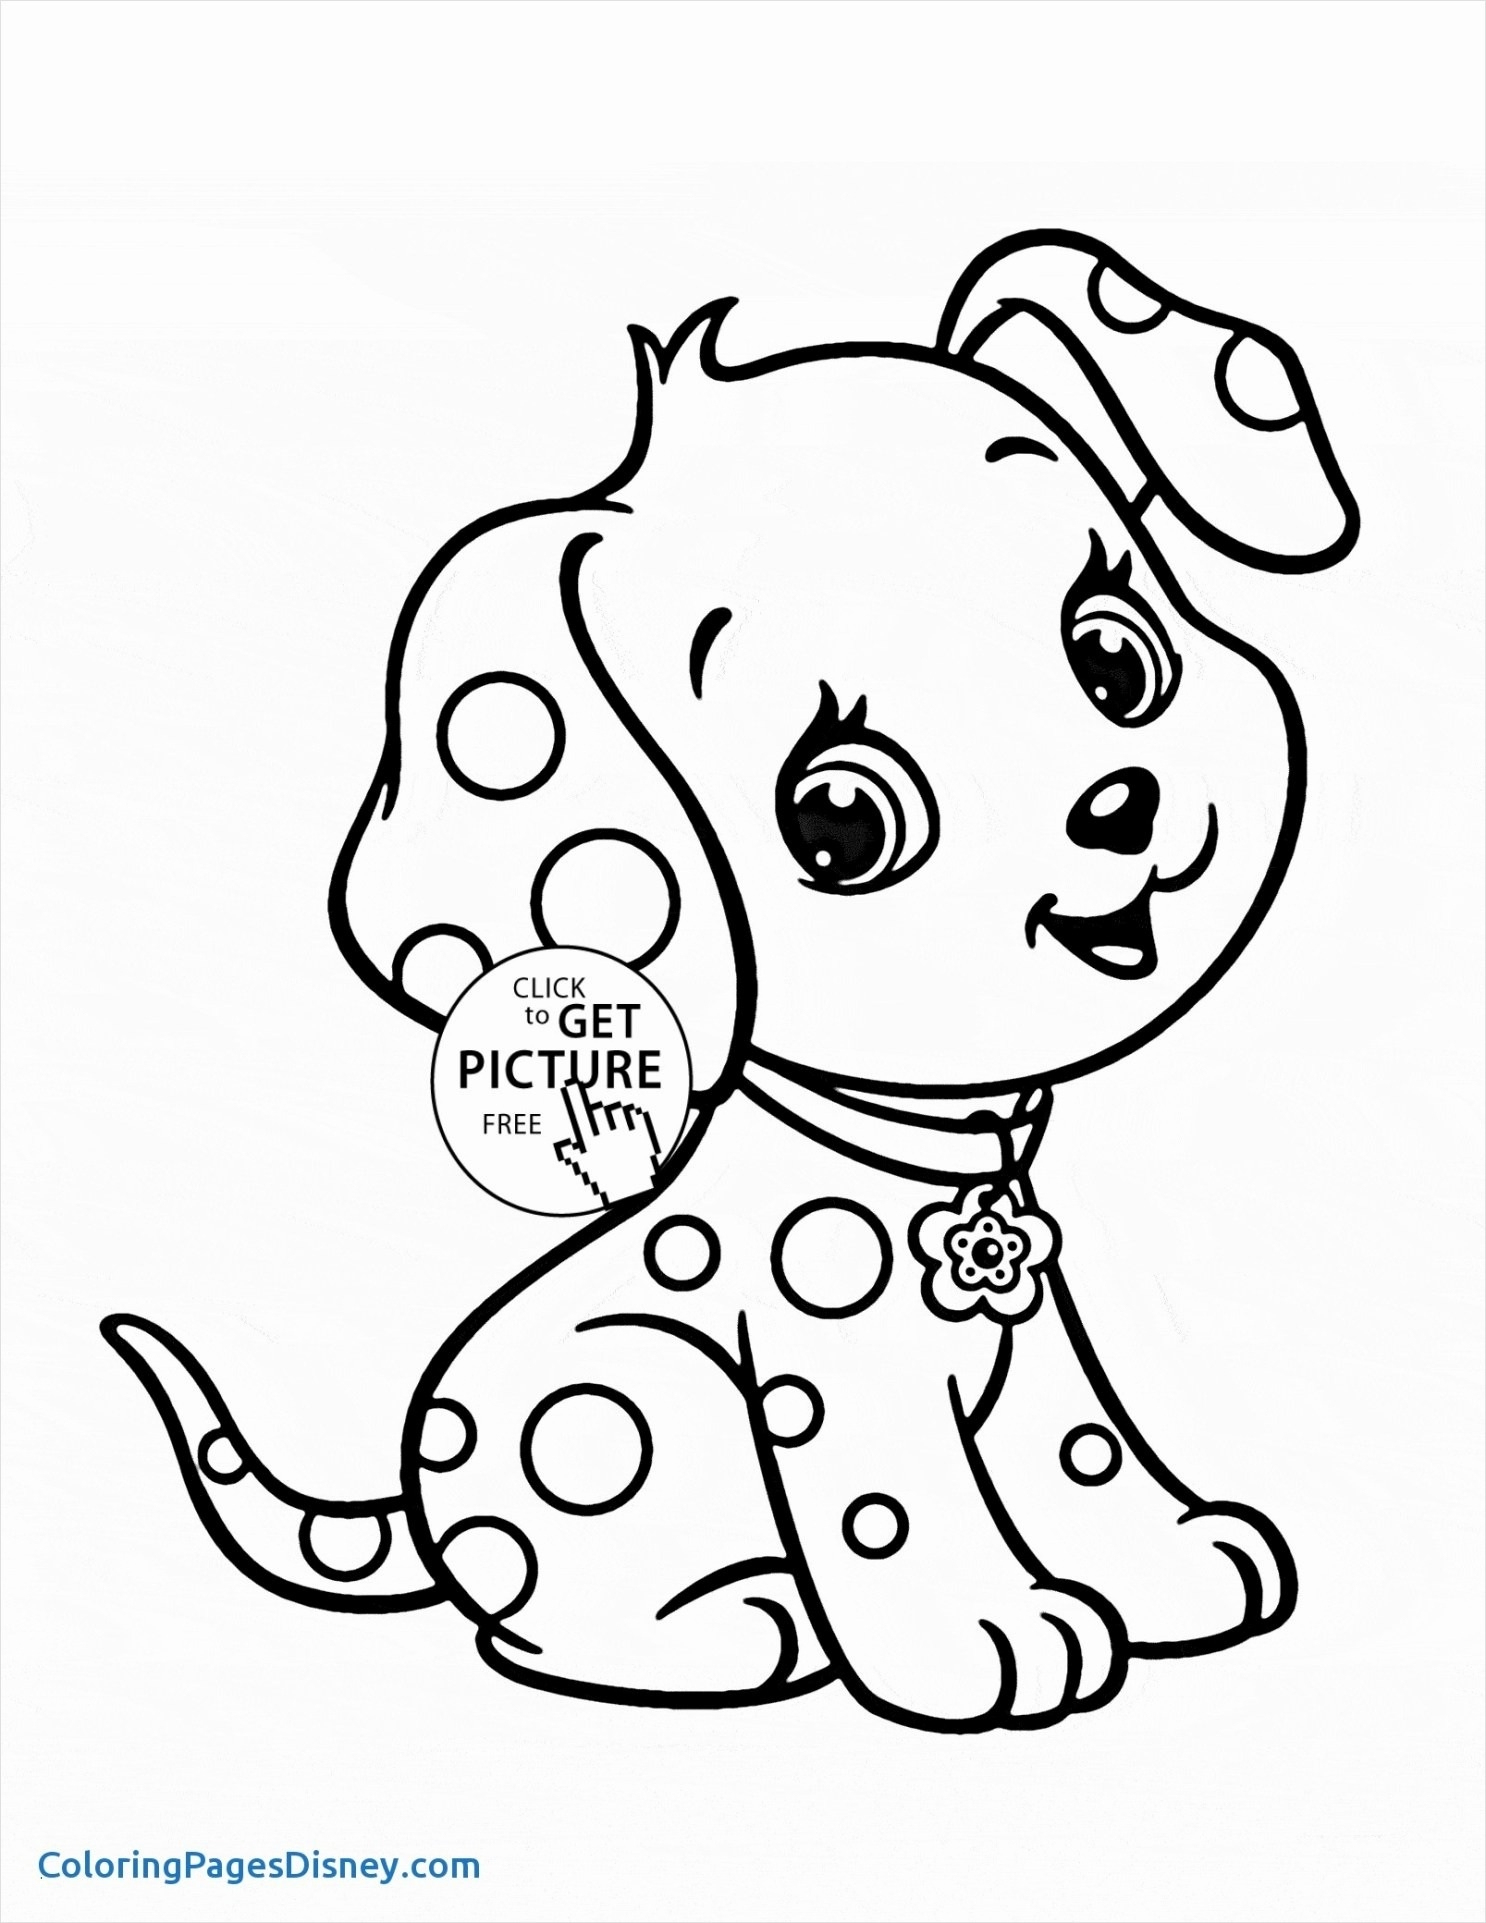 Disney.com Coloring Pages Coloring Pages Coloring Pages Pdf Disney Free Bible For Kids To